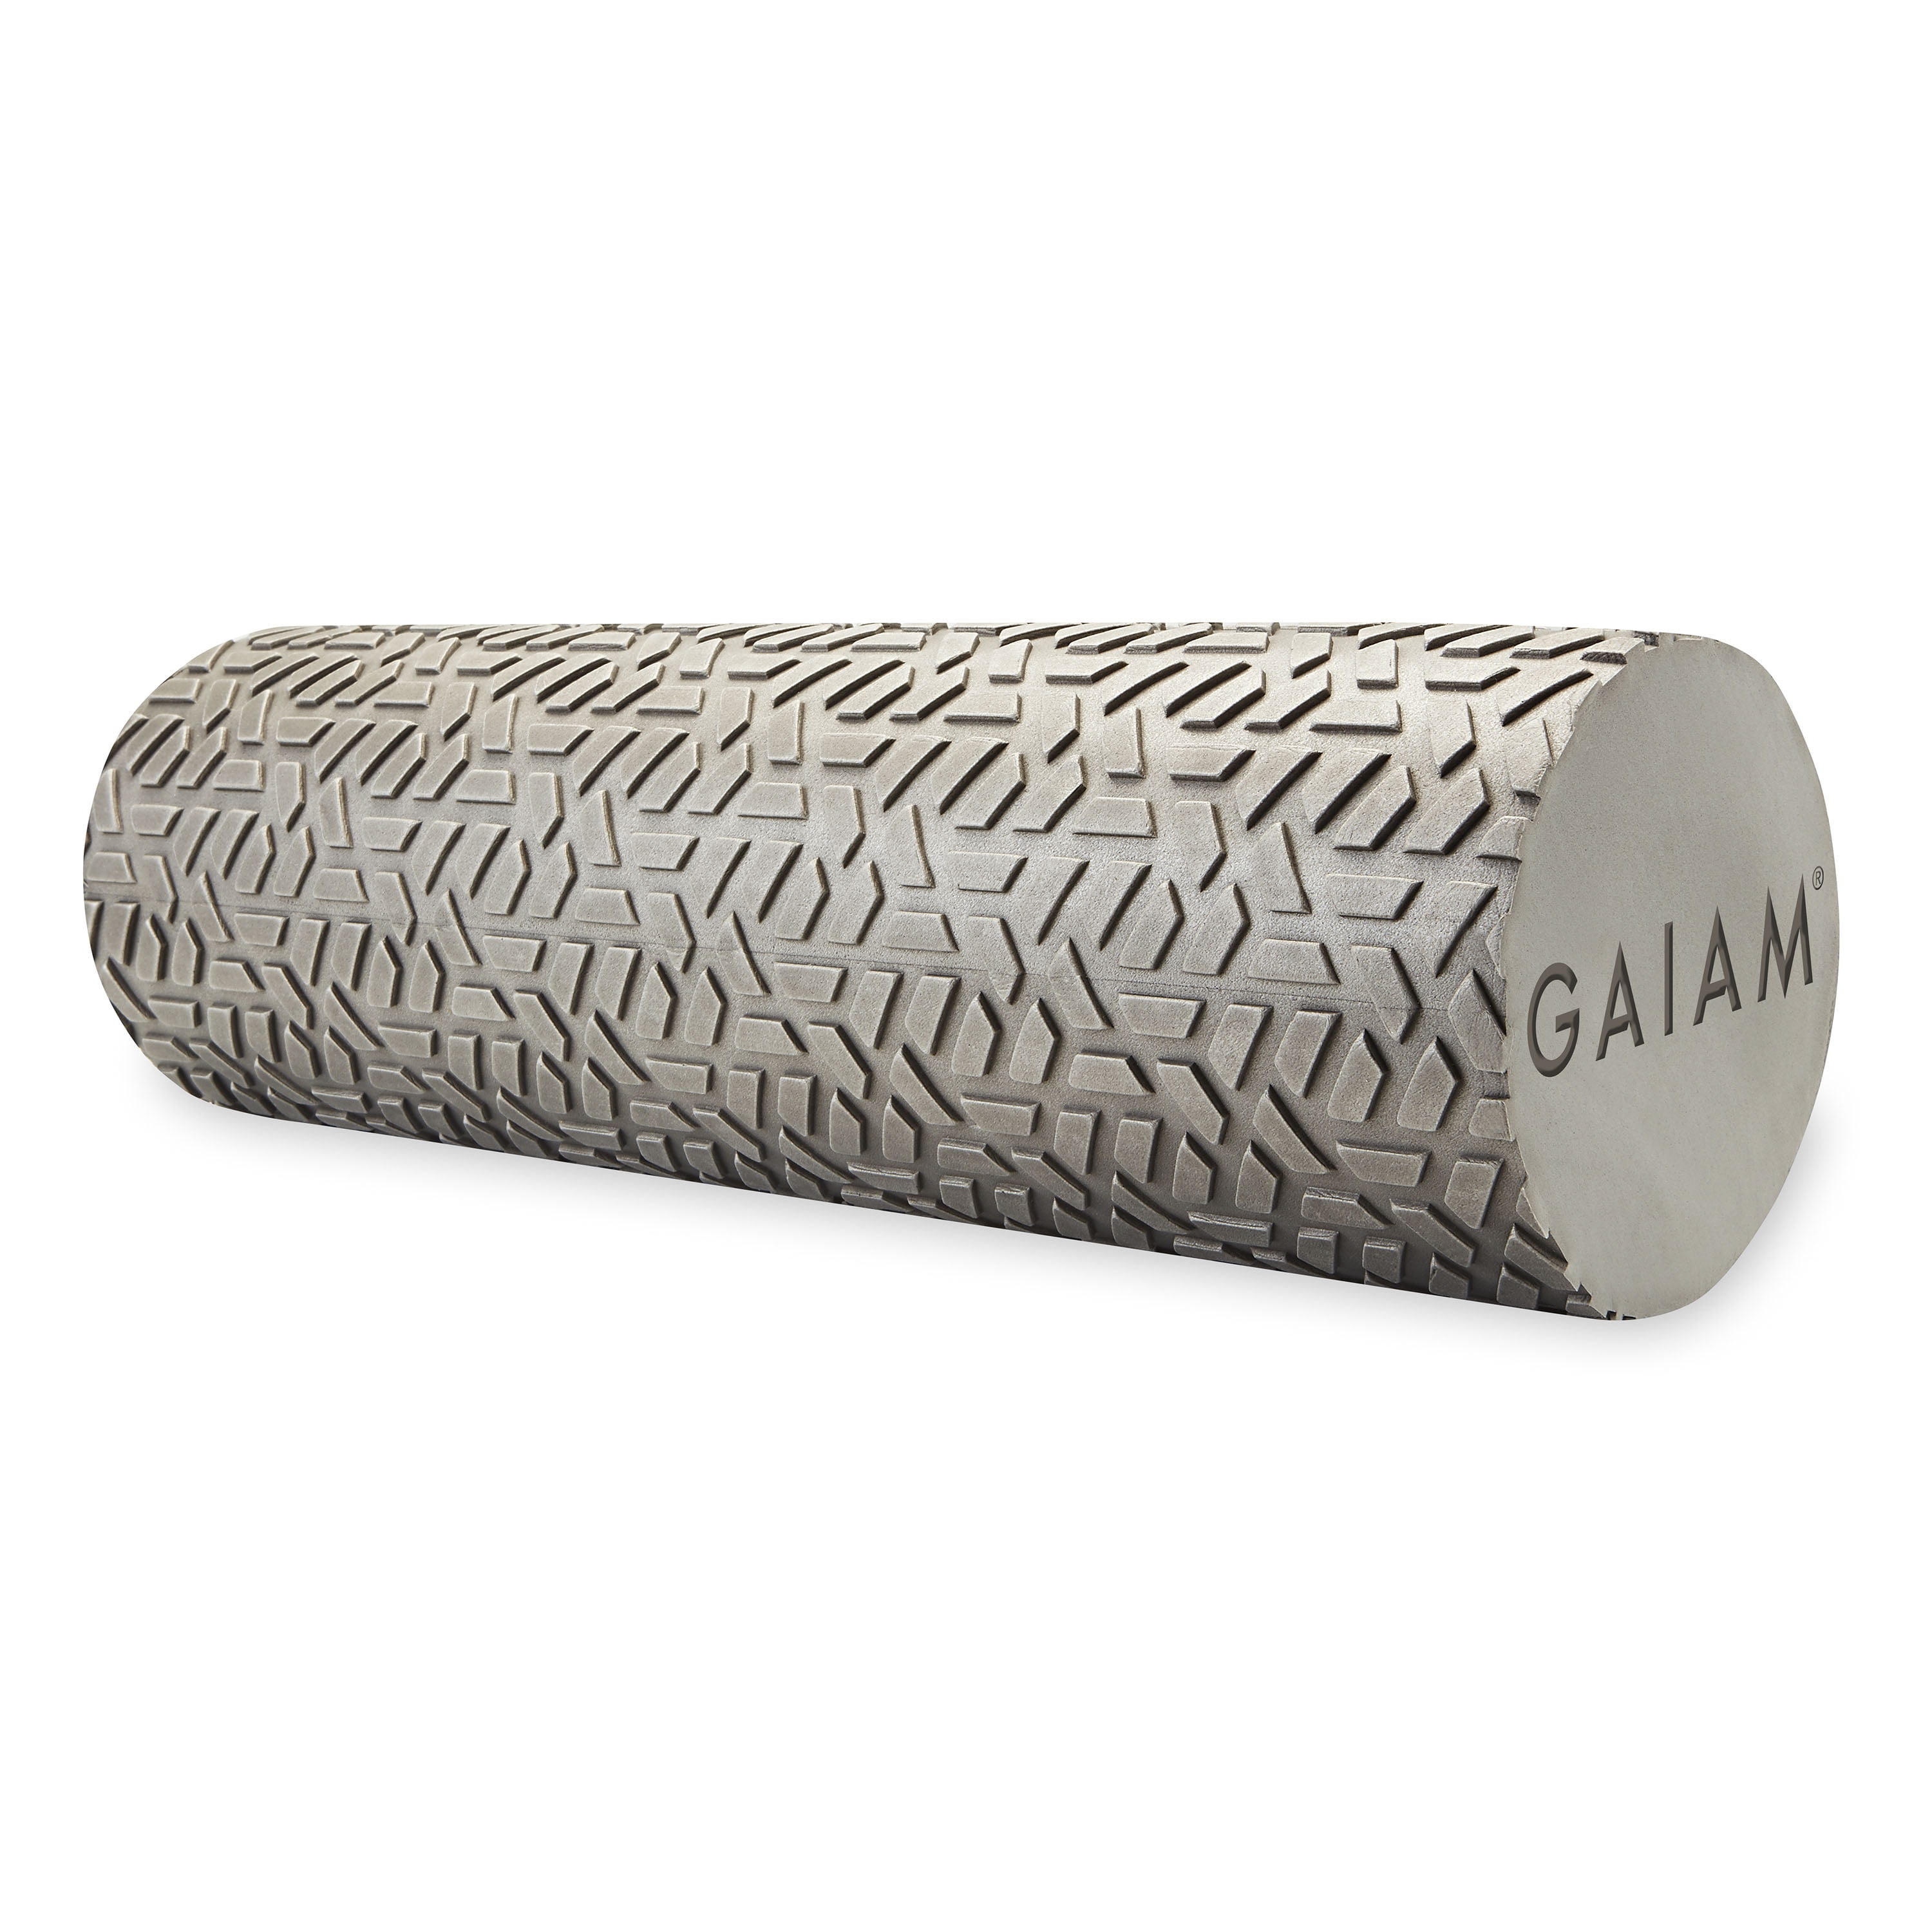 18 Inch Gaiam Restore Foam Roller with Self-Guided Exercise Illustrations Printed on Massage Roller